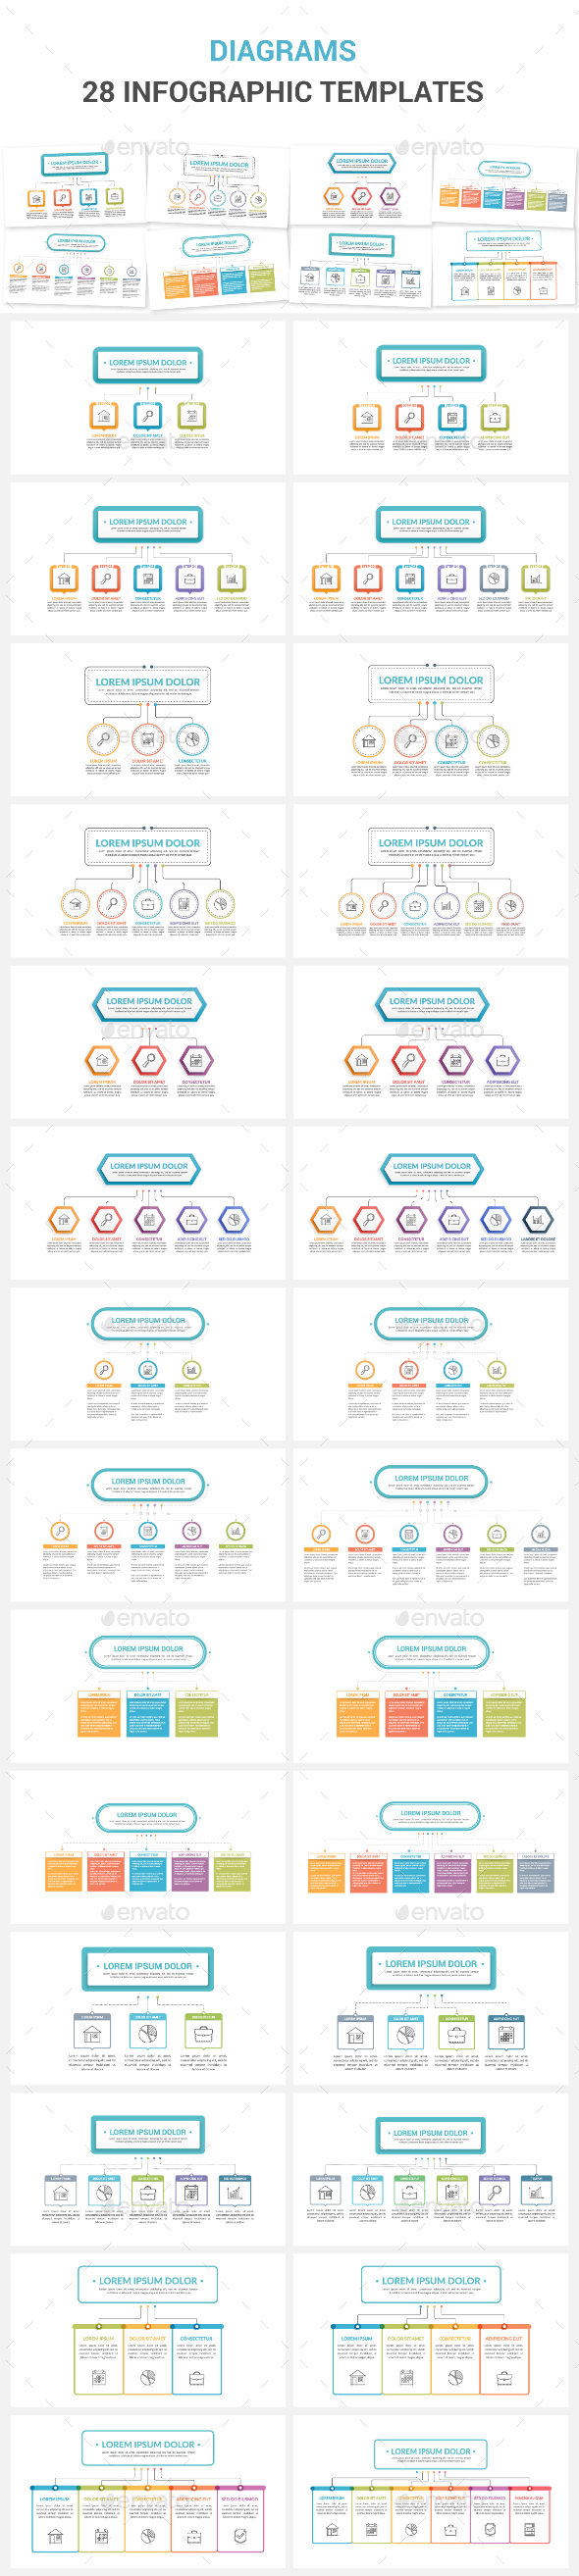 Infographic Templates - Diagrams